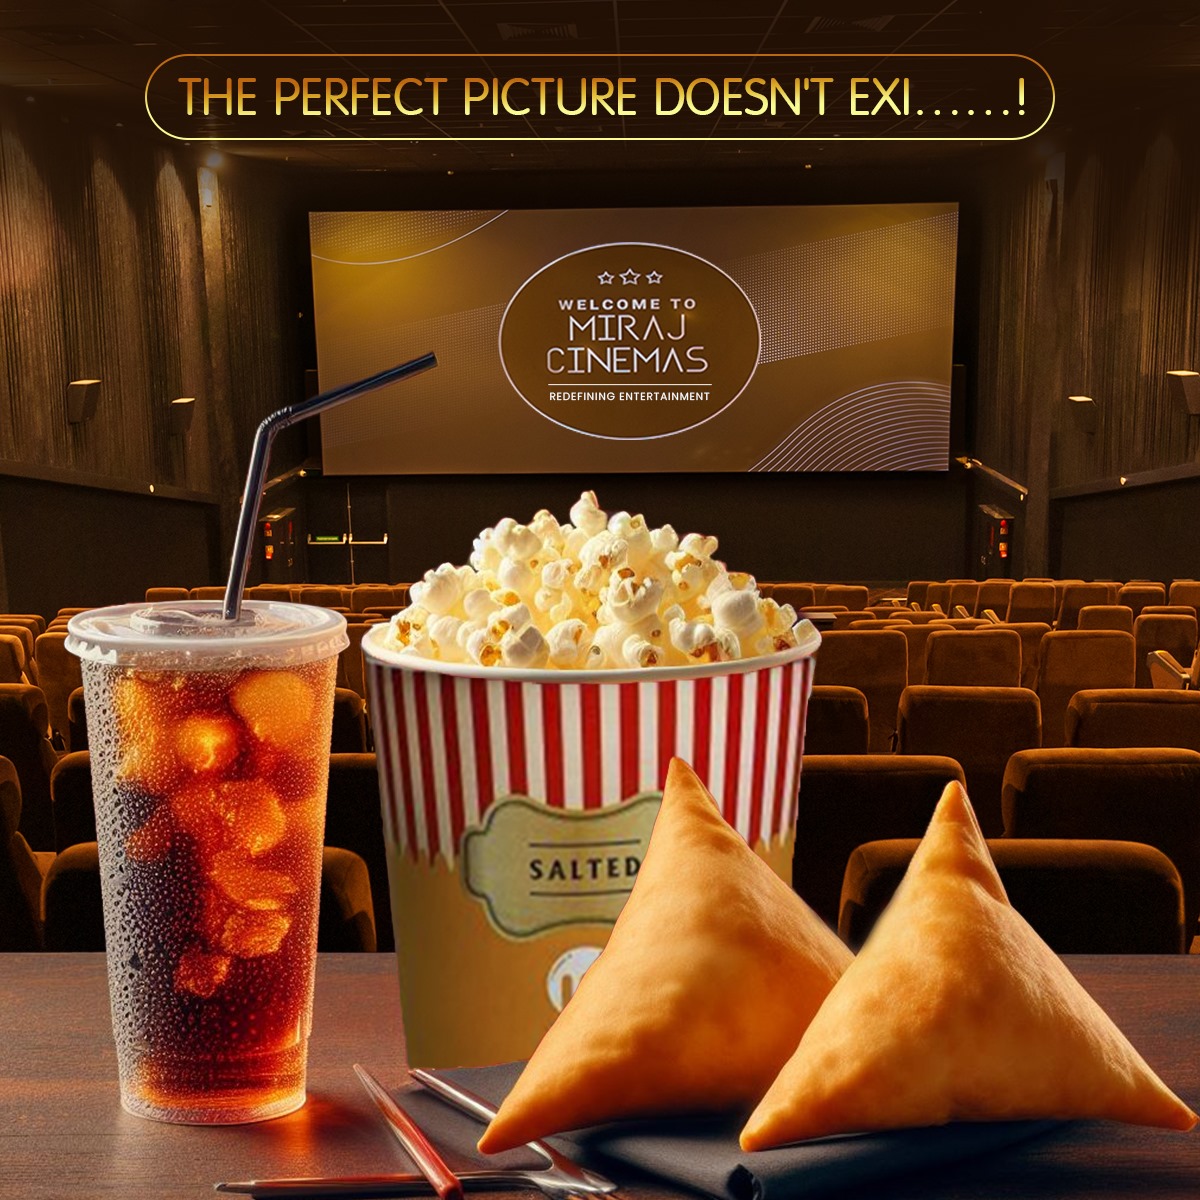 They say the perfect picture doesn't exist, but we've got something that comes close! 📽✨ At Miraj Cinemas, enjoy a stunning view of the big screen while indulging in our delicious snacks. Get ready for the ultimate movie experience 🍿🎬 
.
#MirajCinemas #PerfectPicture…